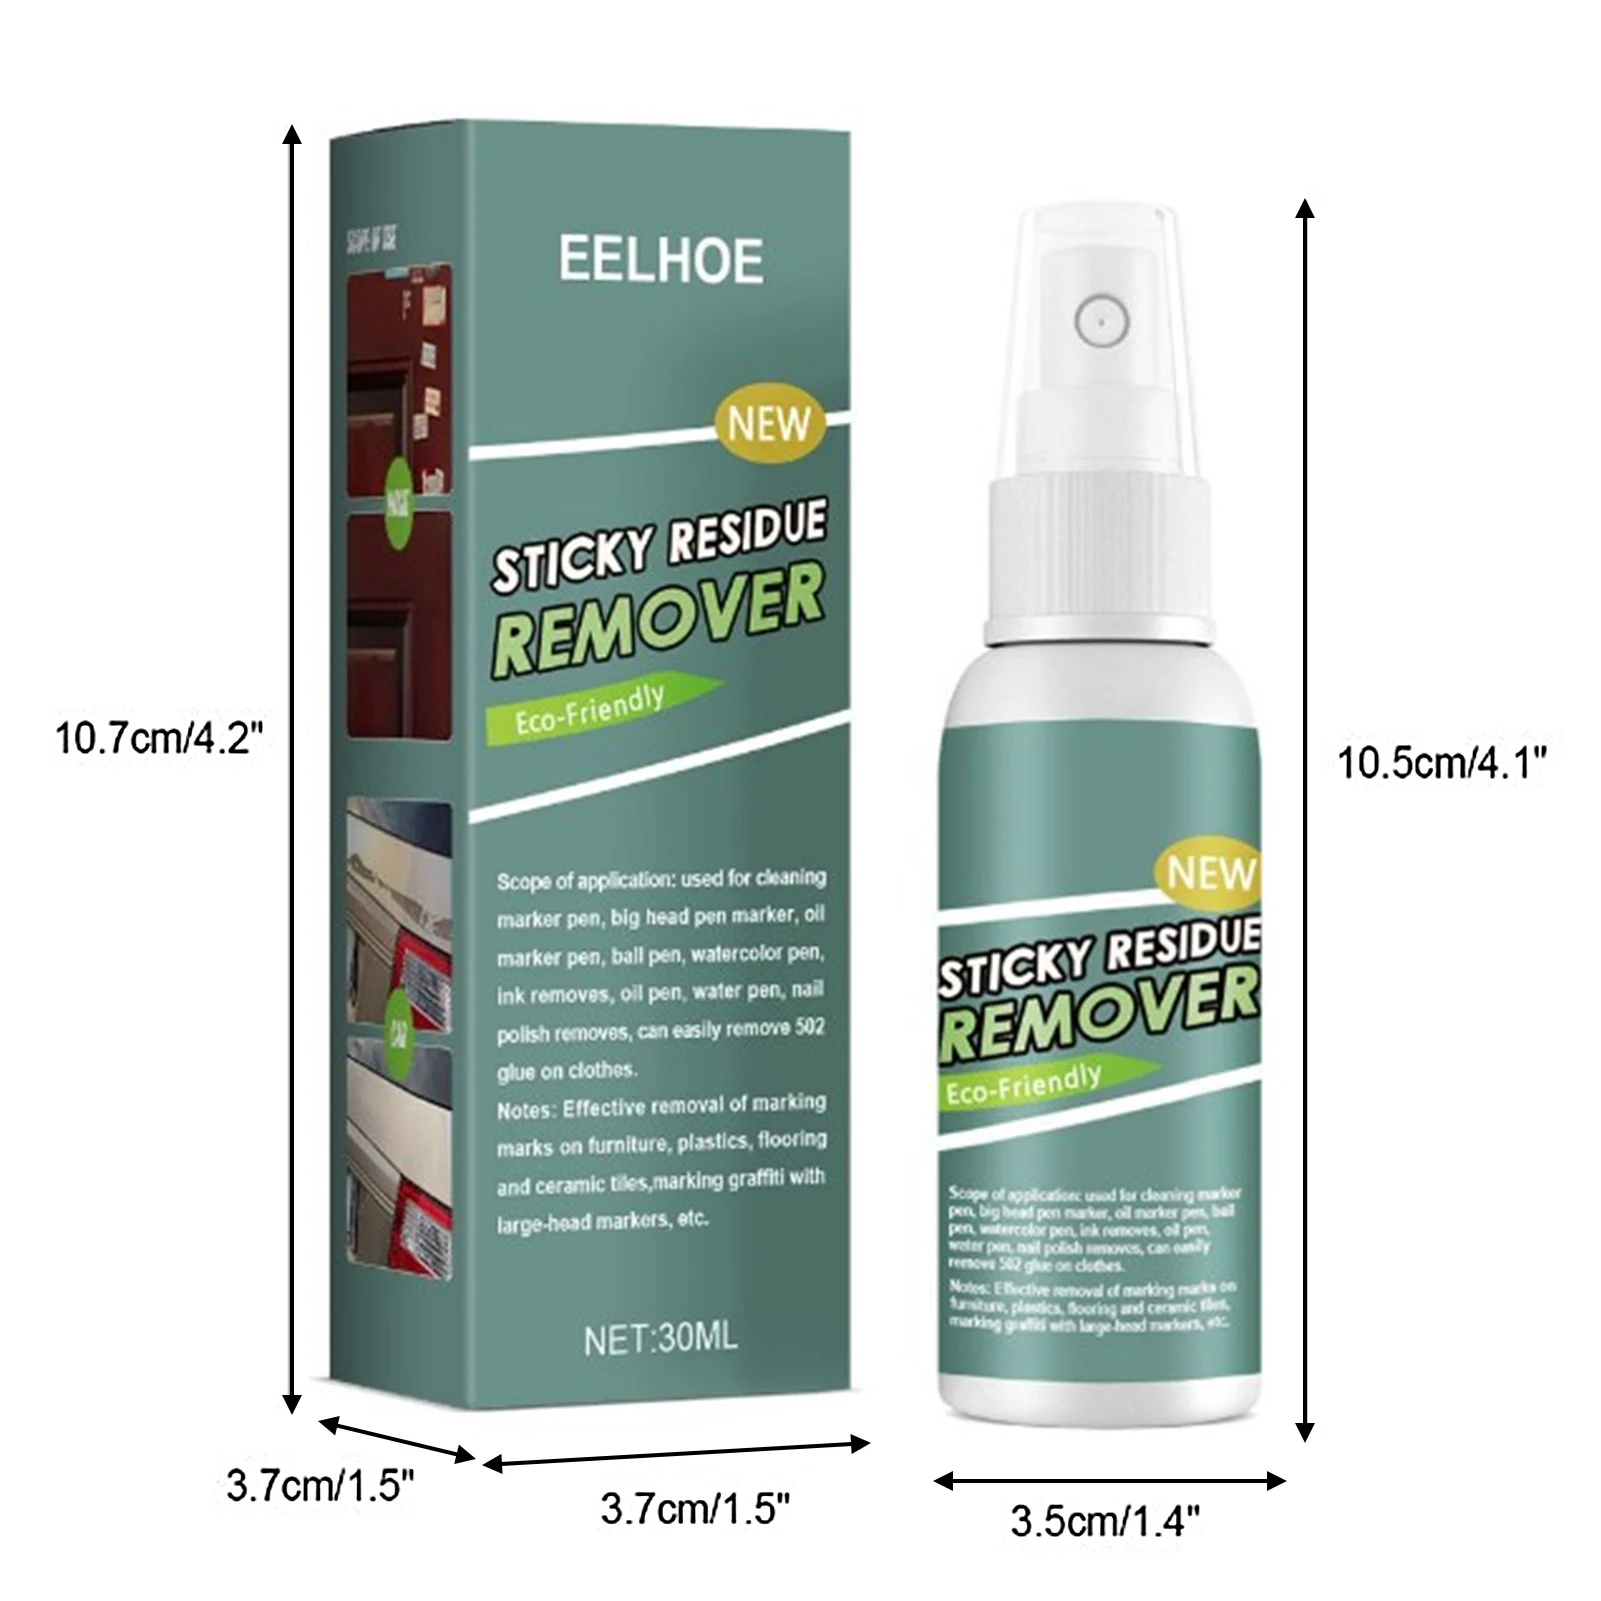 30ML Quick And Easy Sticker Remover Sticky Esidue Remover Wall Sticker Glue Removal Car Glass Label Cleaner Adhesive Glue Spray